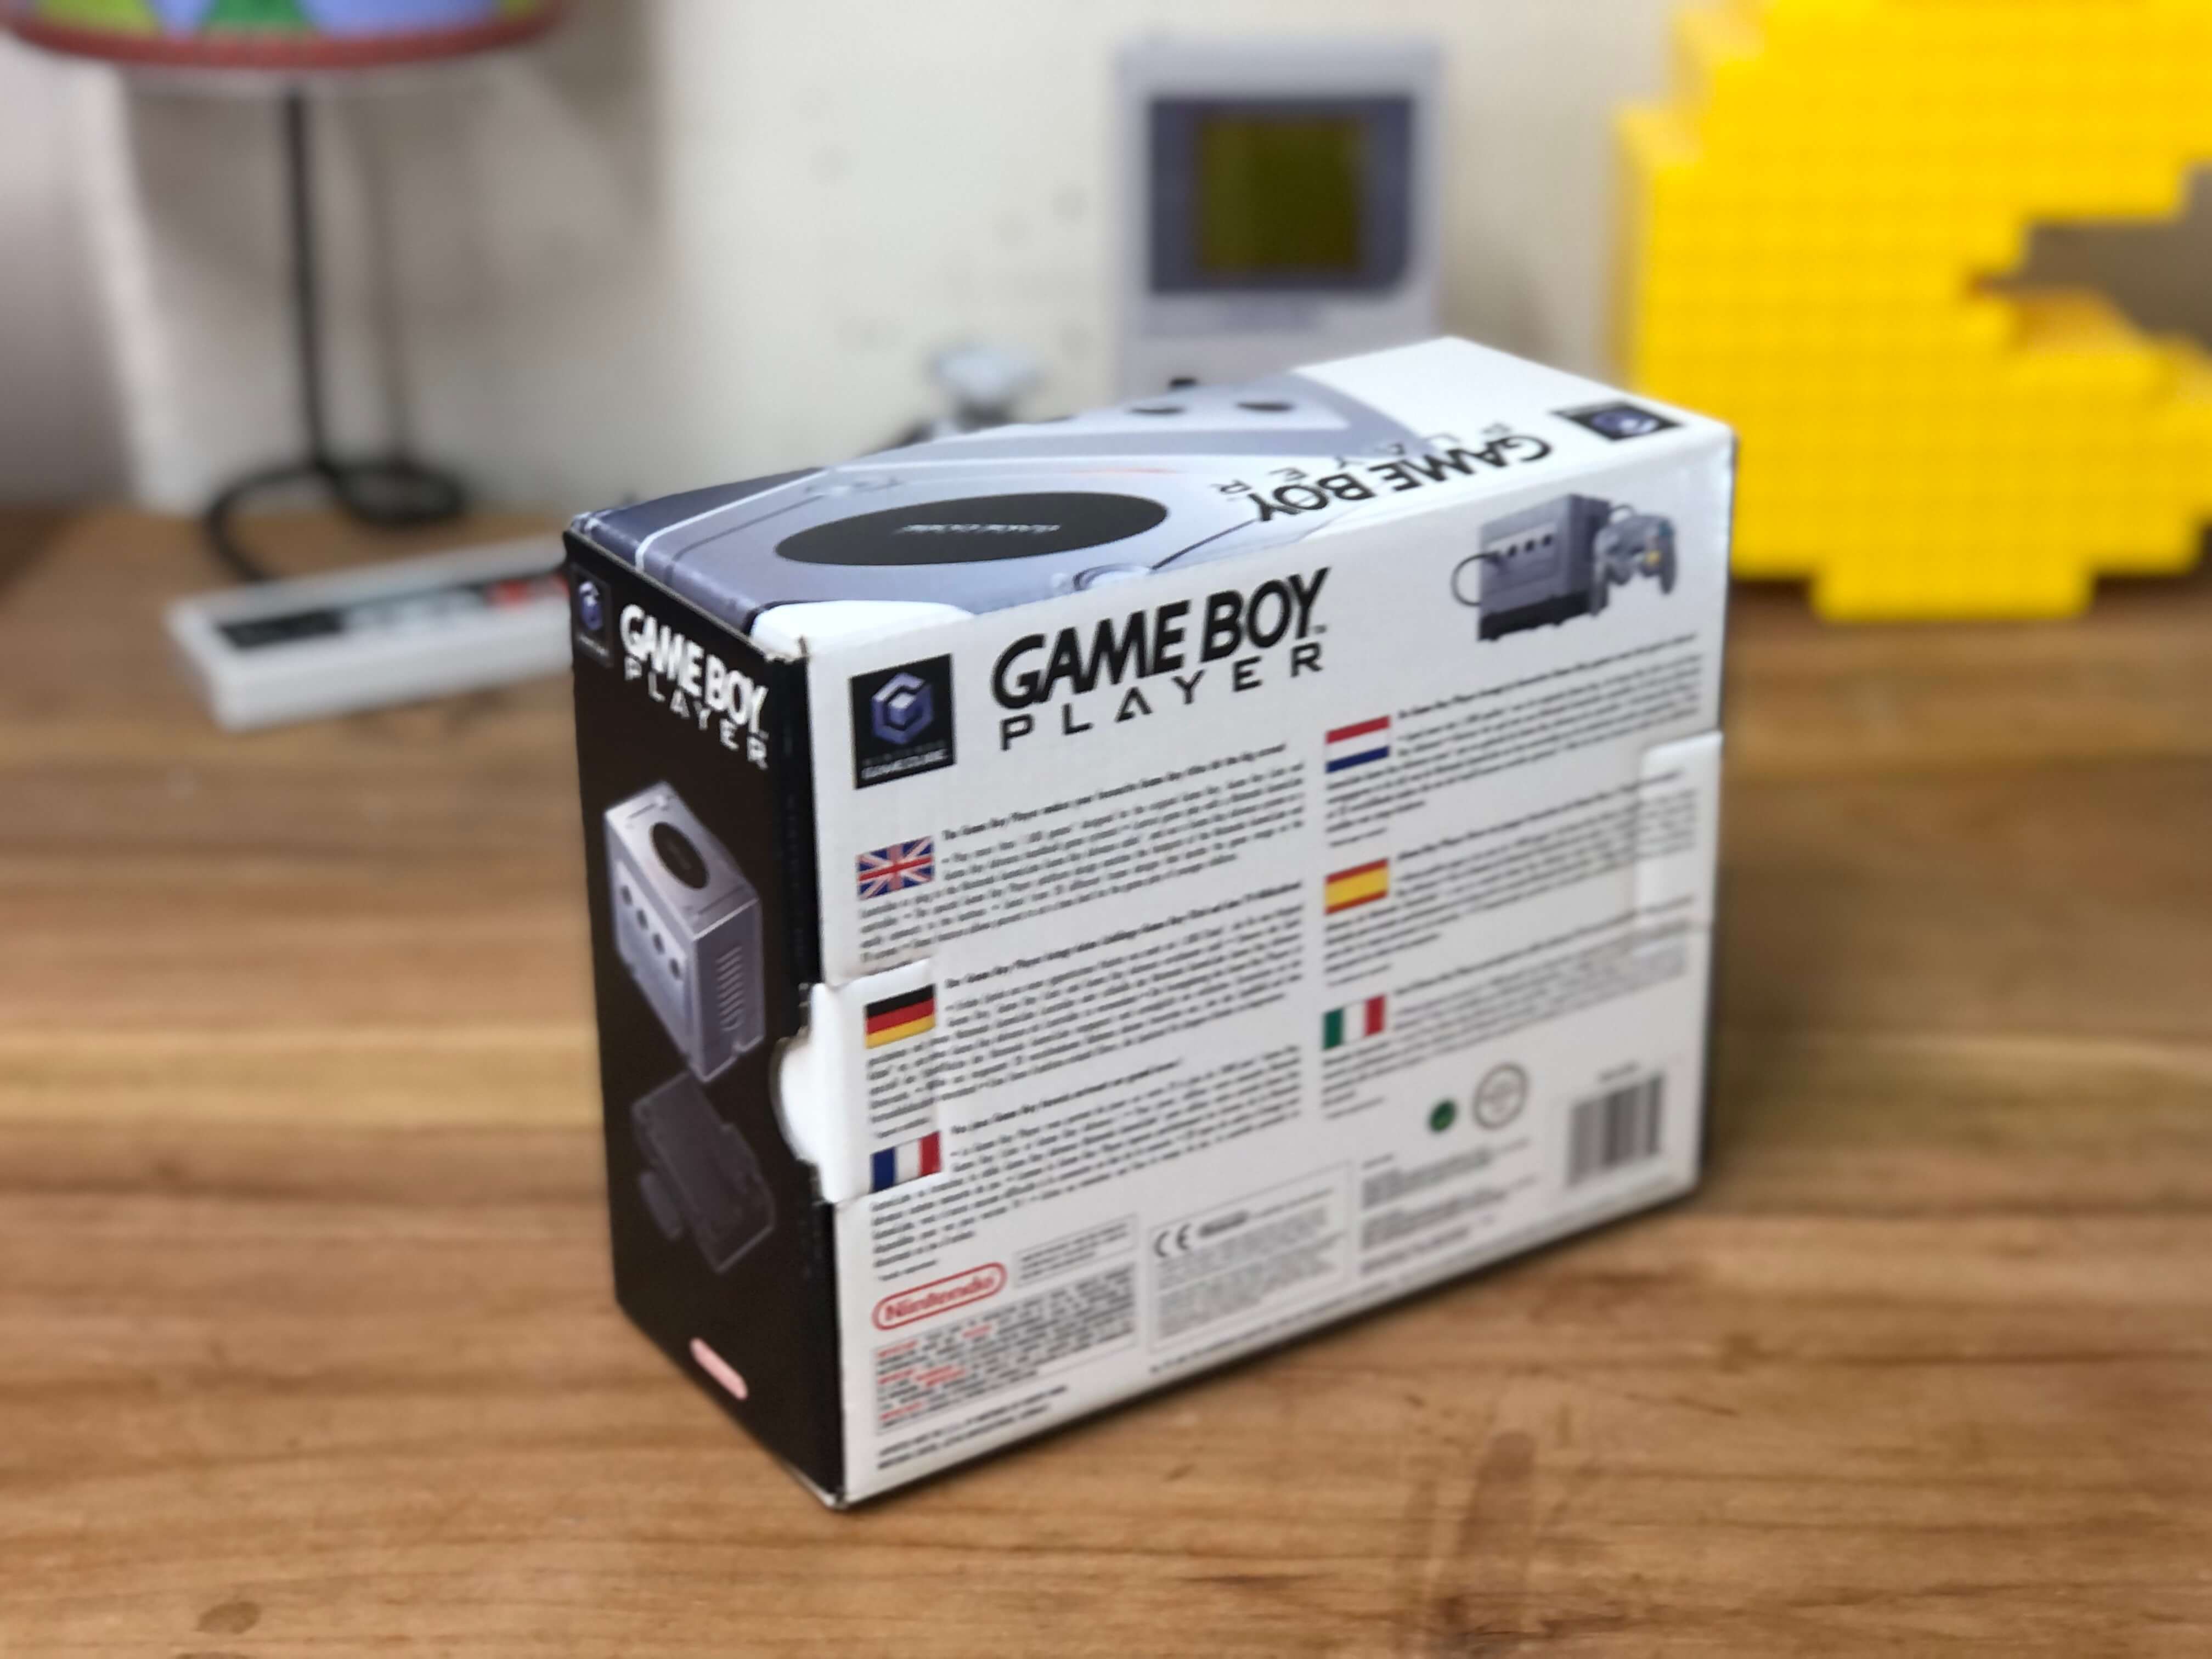 Nintendo Gamecube Gameboy Player [With Disc] [Complete] - Gamecube Hardware - 4